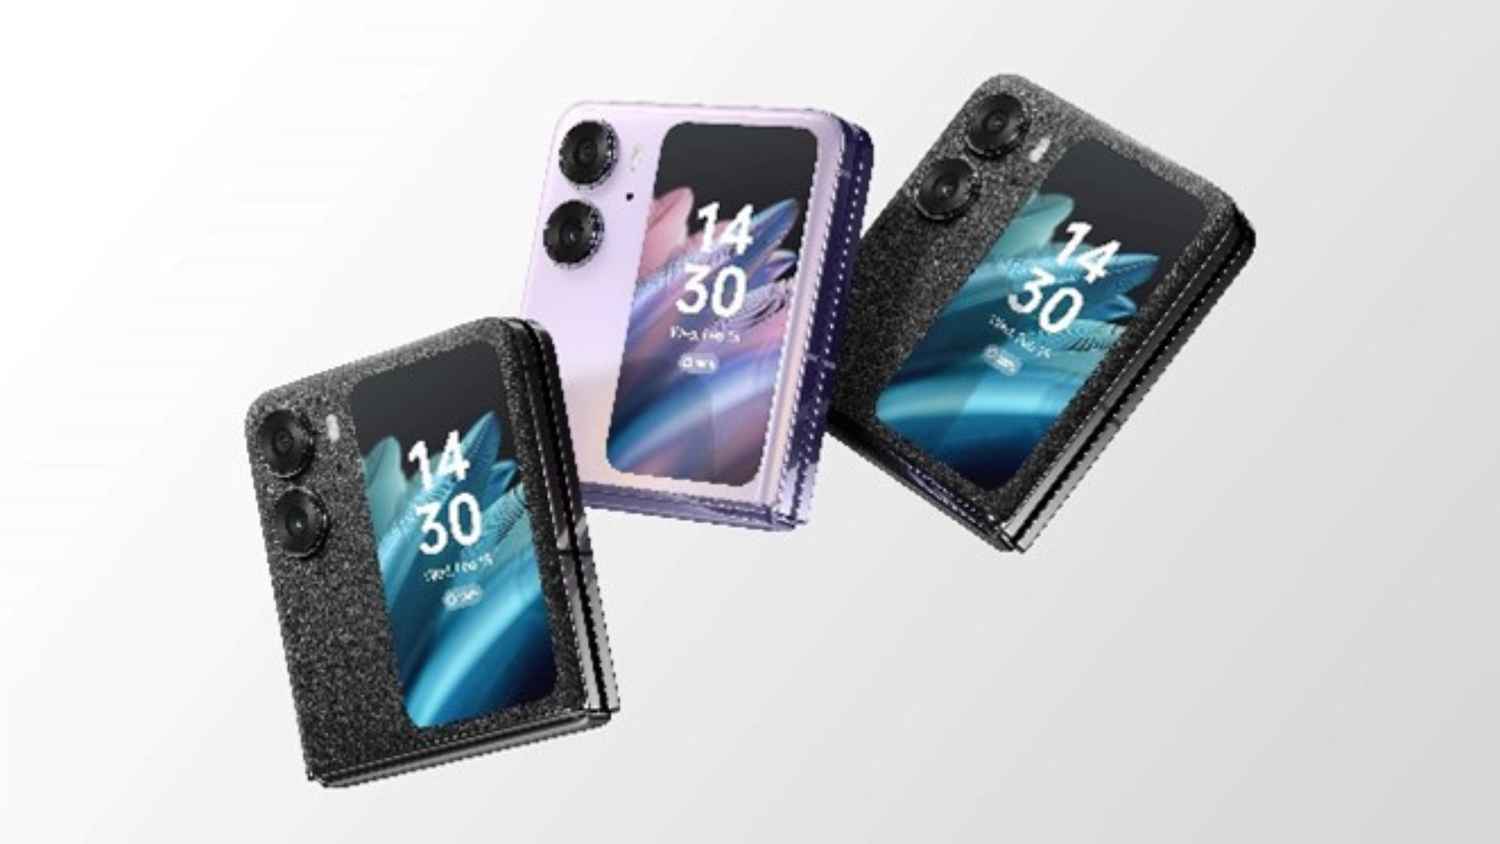 Oppo Find N2 Flip joins the list of foldable phones available in India right now